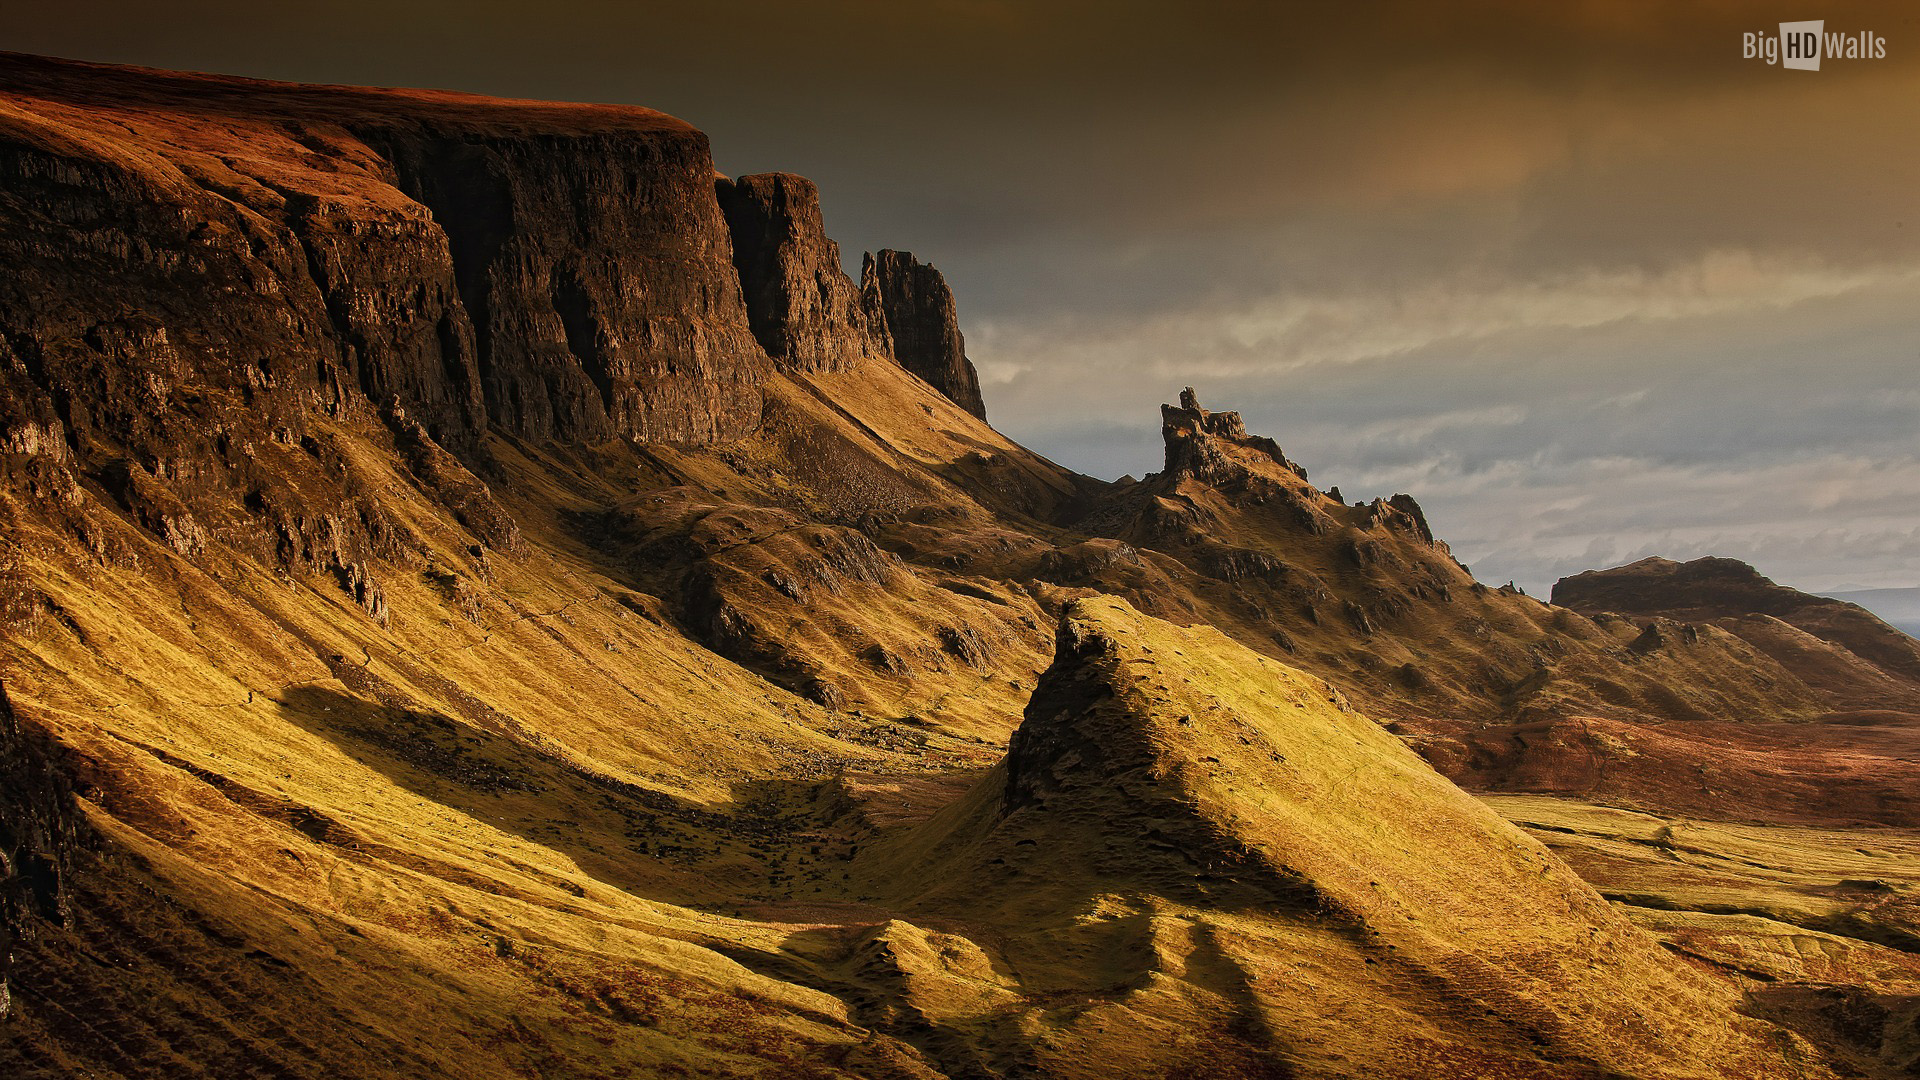  Here are 10 awesome landscapes wallpapers of Scotlands landscape